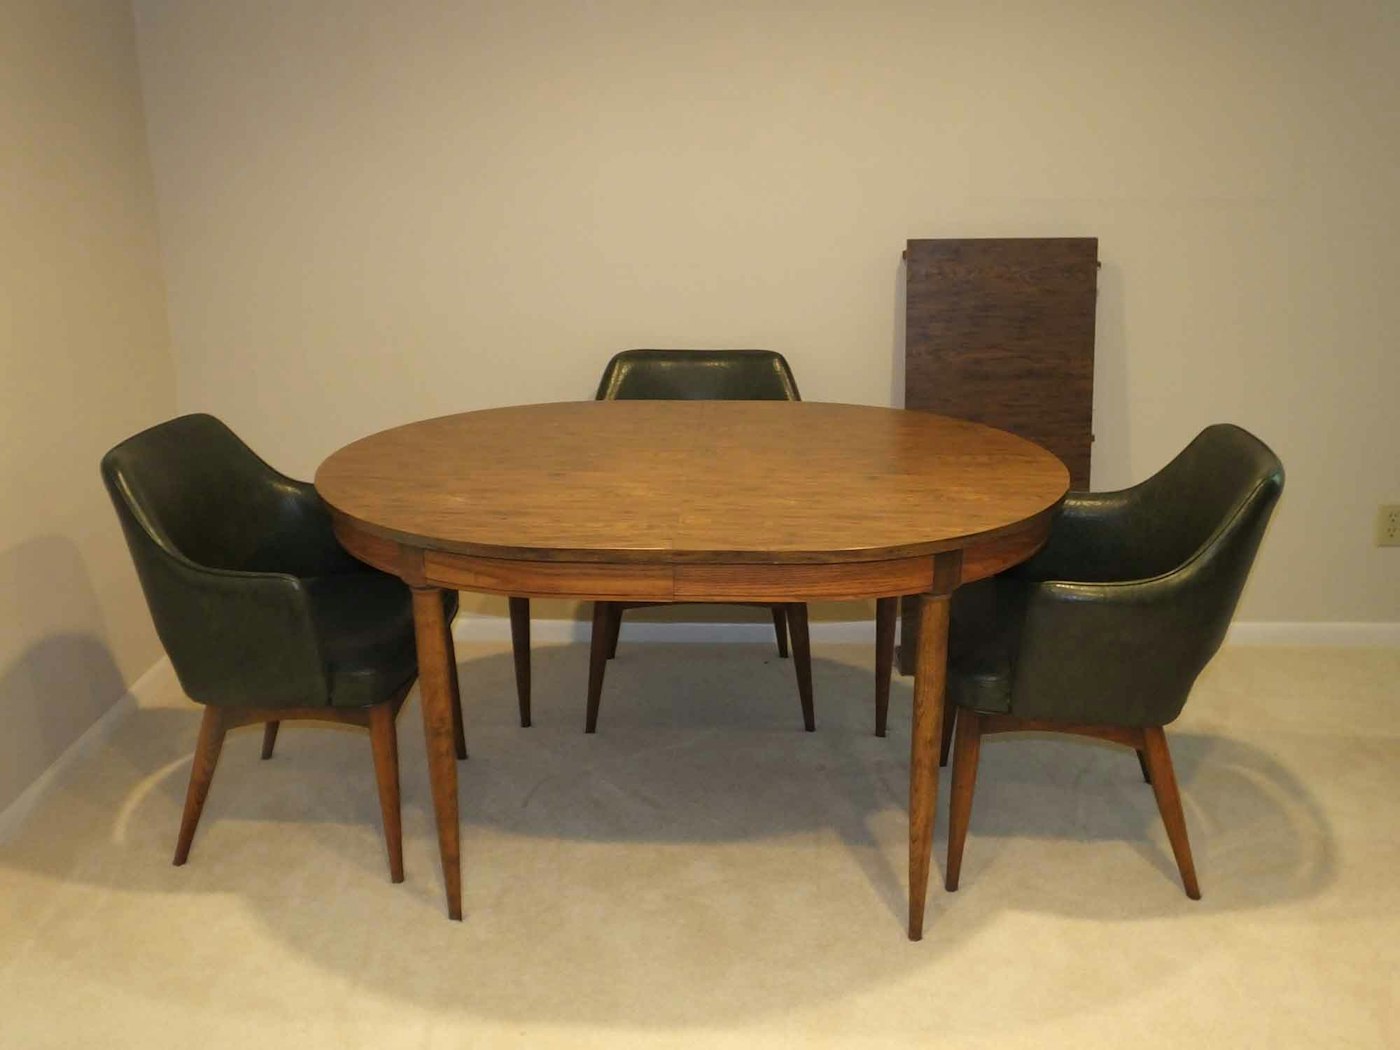 B Brody Dining Room Chairs Model 188-08